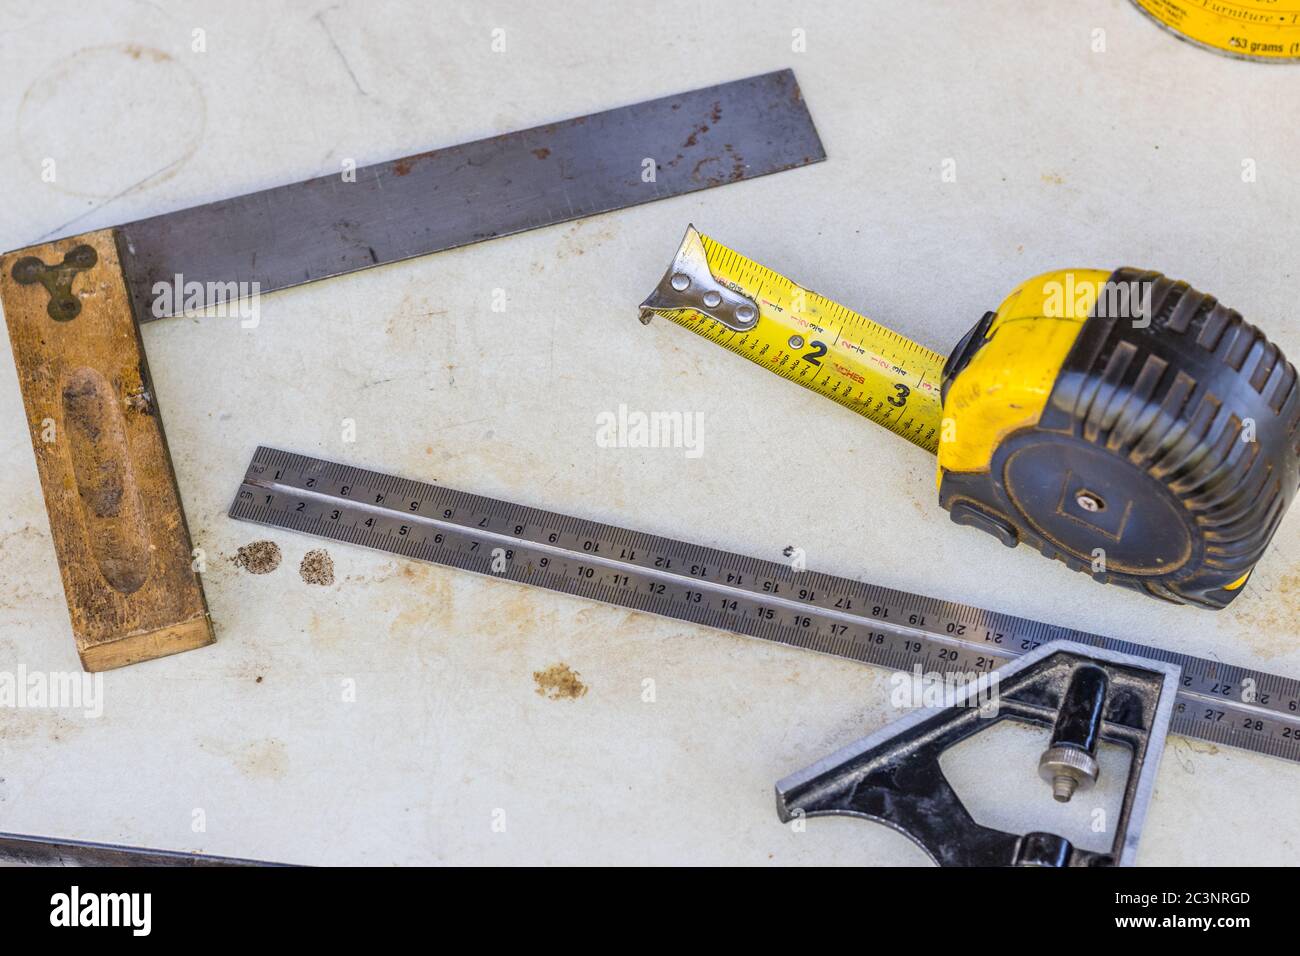 An assortment of measuring tools, try square,machinists square,tape measure Stock Photo